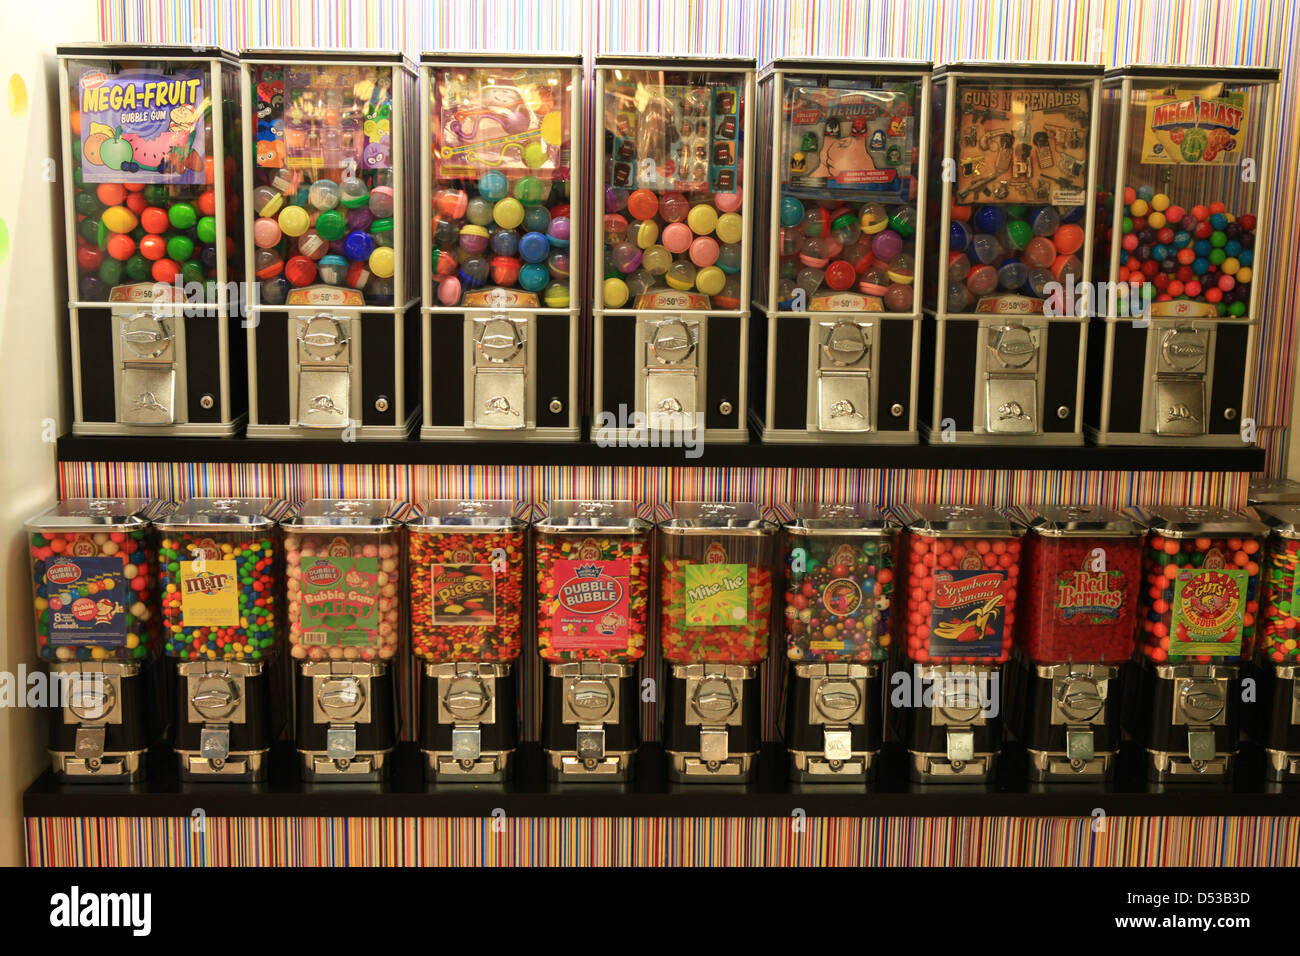 Gum and candy machines in a shopping mall in Indianapolis Stock Photo